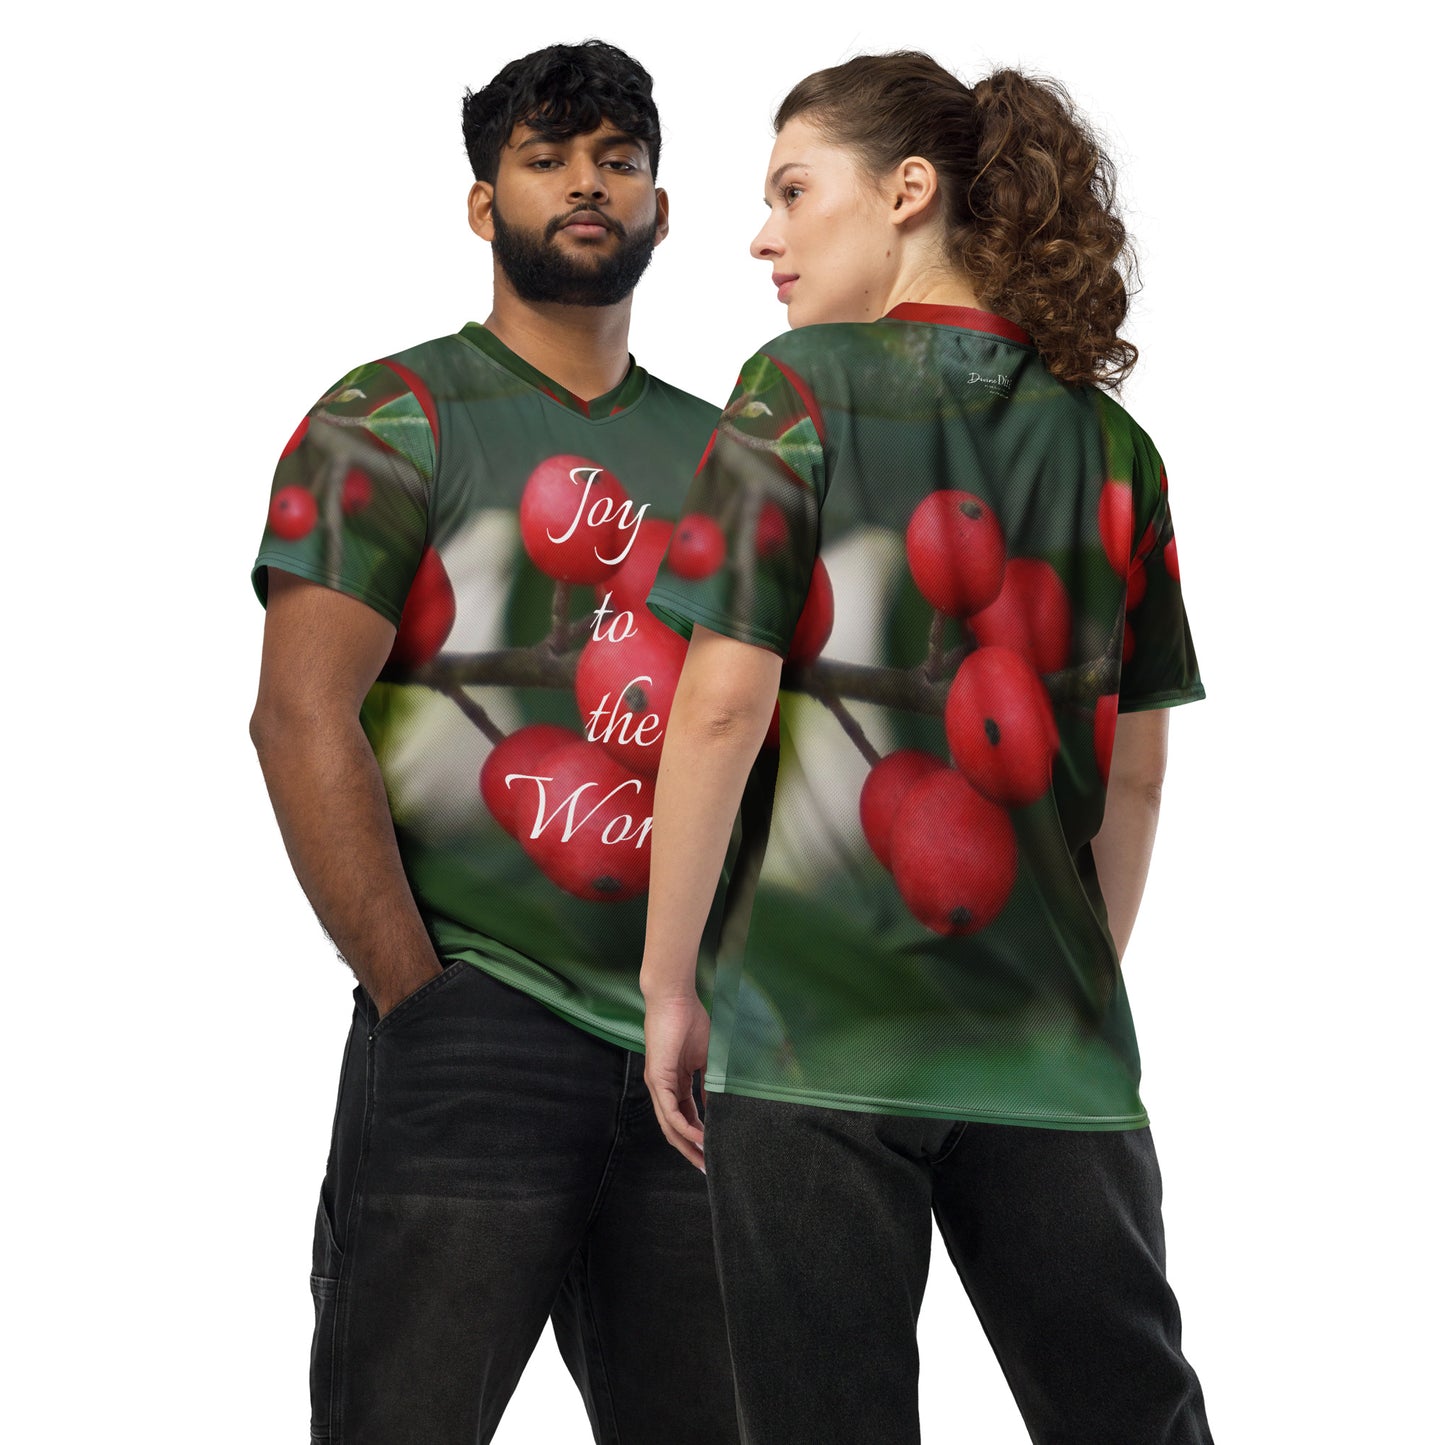 Joy to the World_Holly Berries_Recycled unisex sports jersey